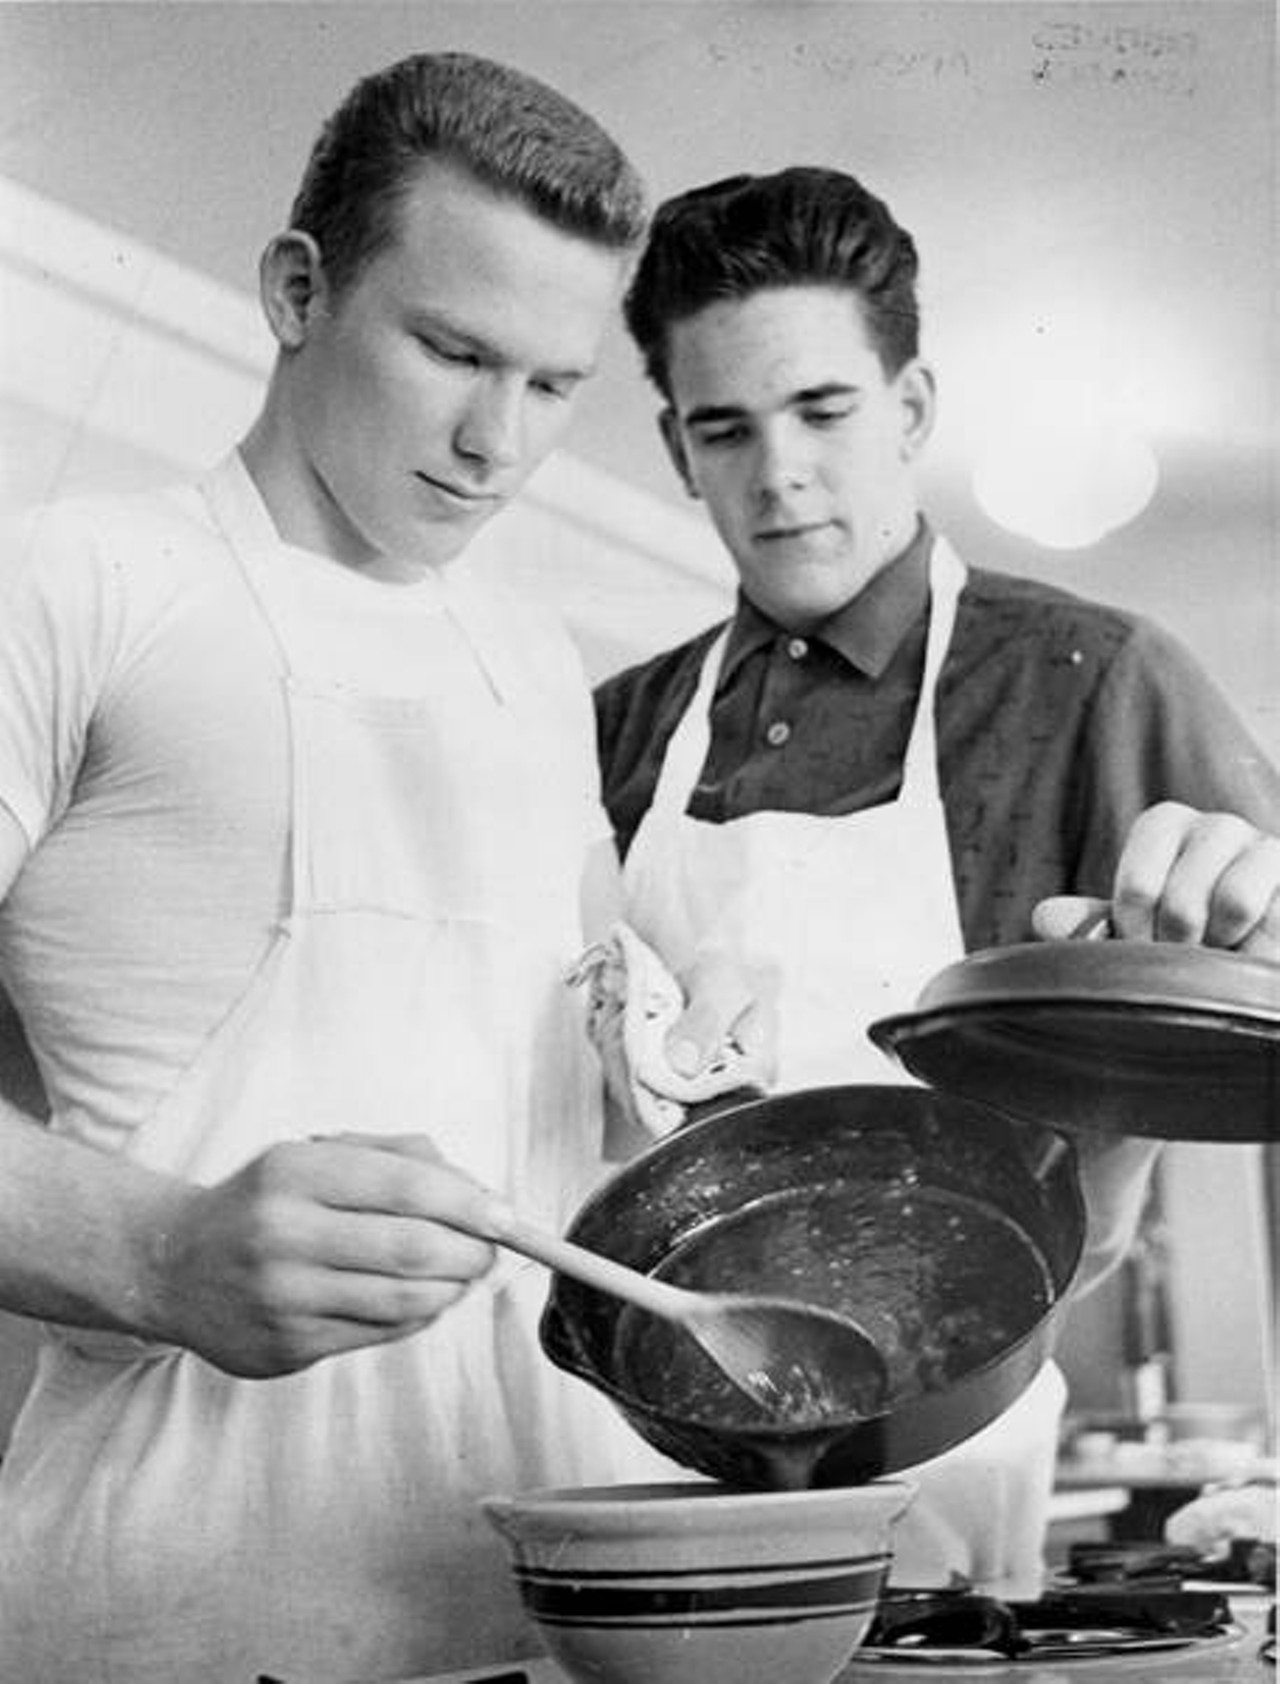  James Ford Rhodes High School Students Cooking, 1961